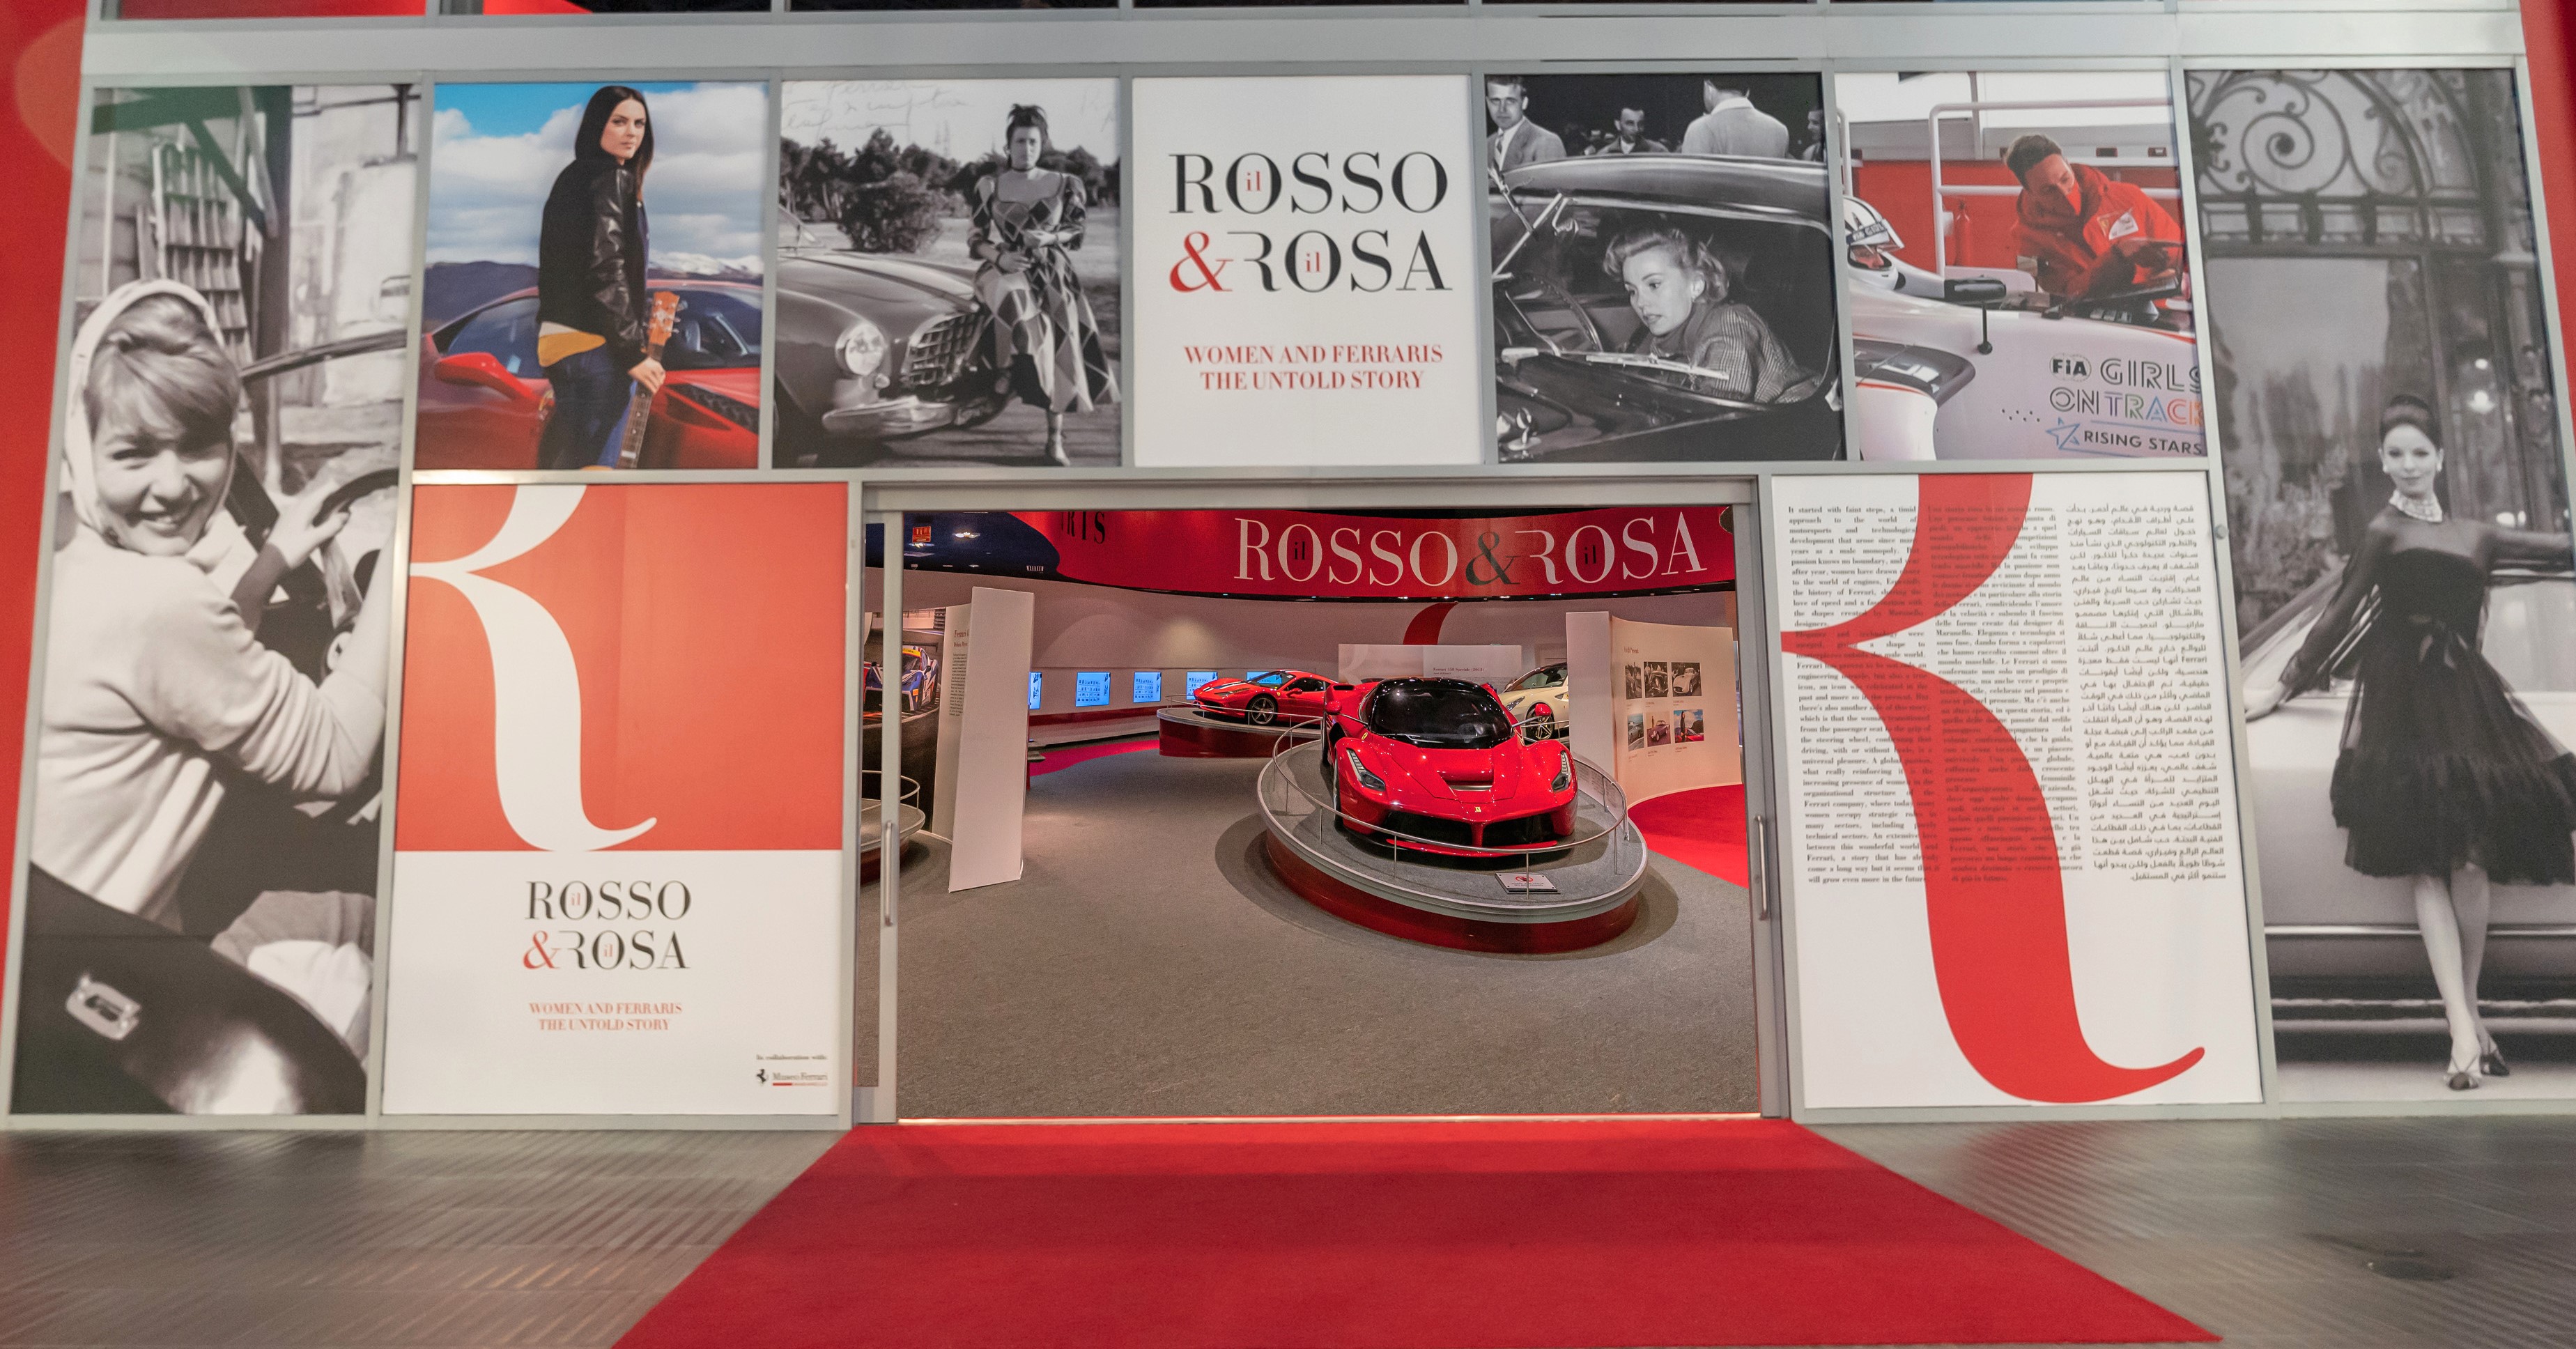 Ferrari World Abu Dhabi Welcomes Guests To The Last Of ‘Women And Ferraris – The Untold Story’ Exhibition